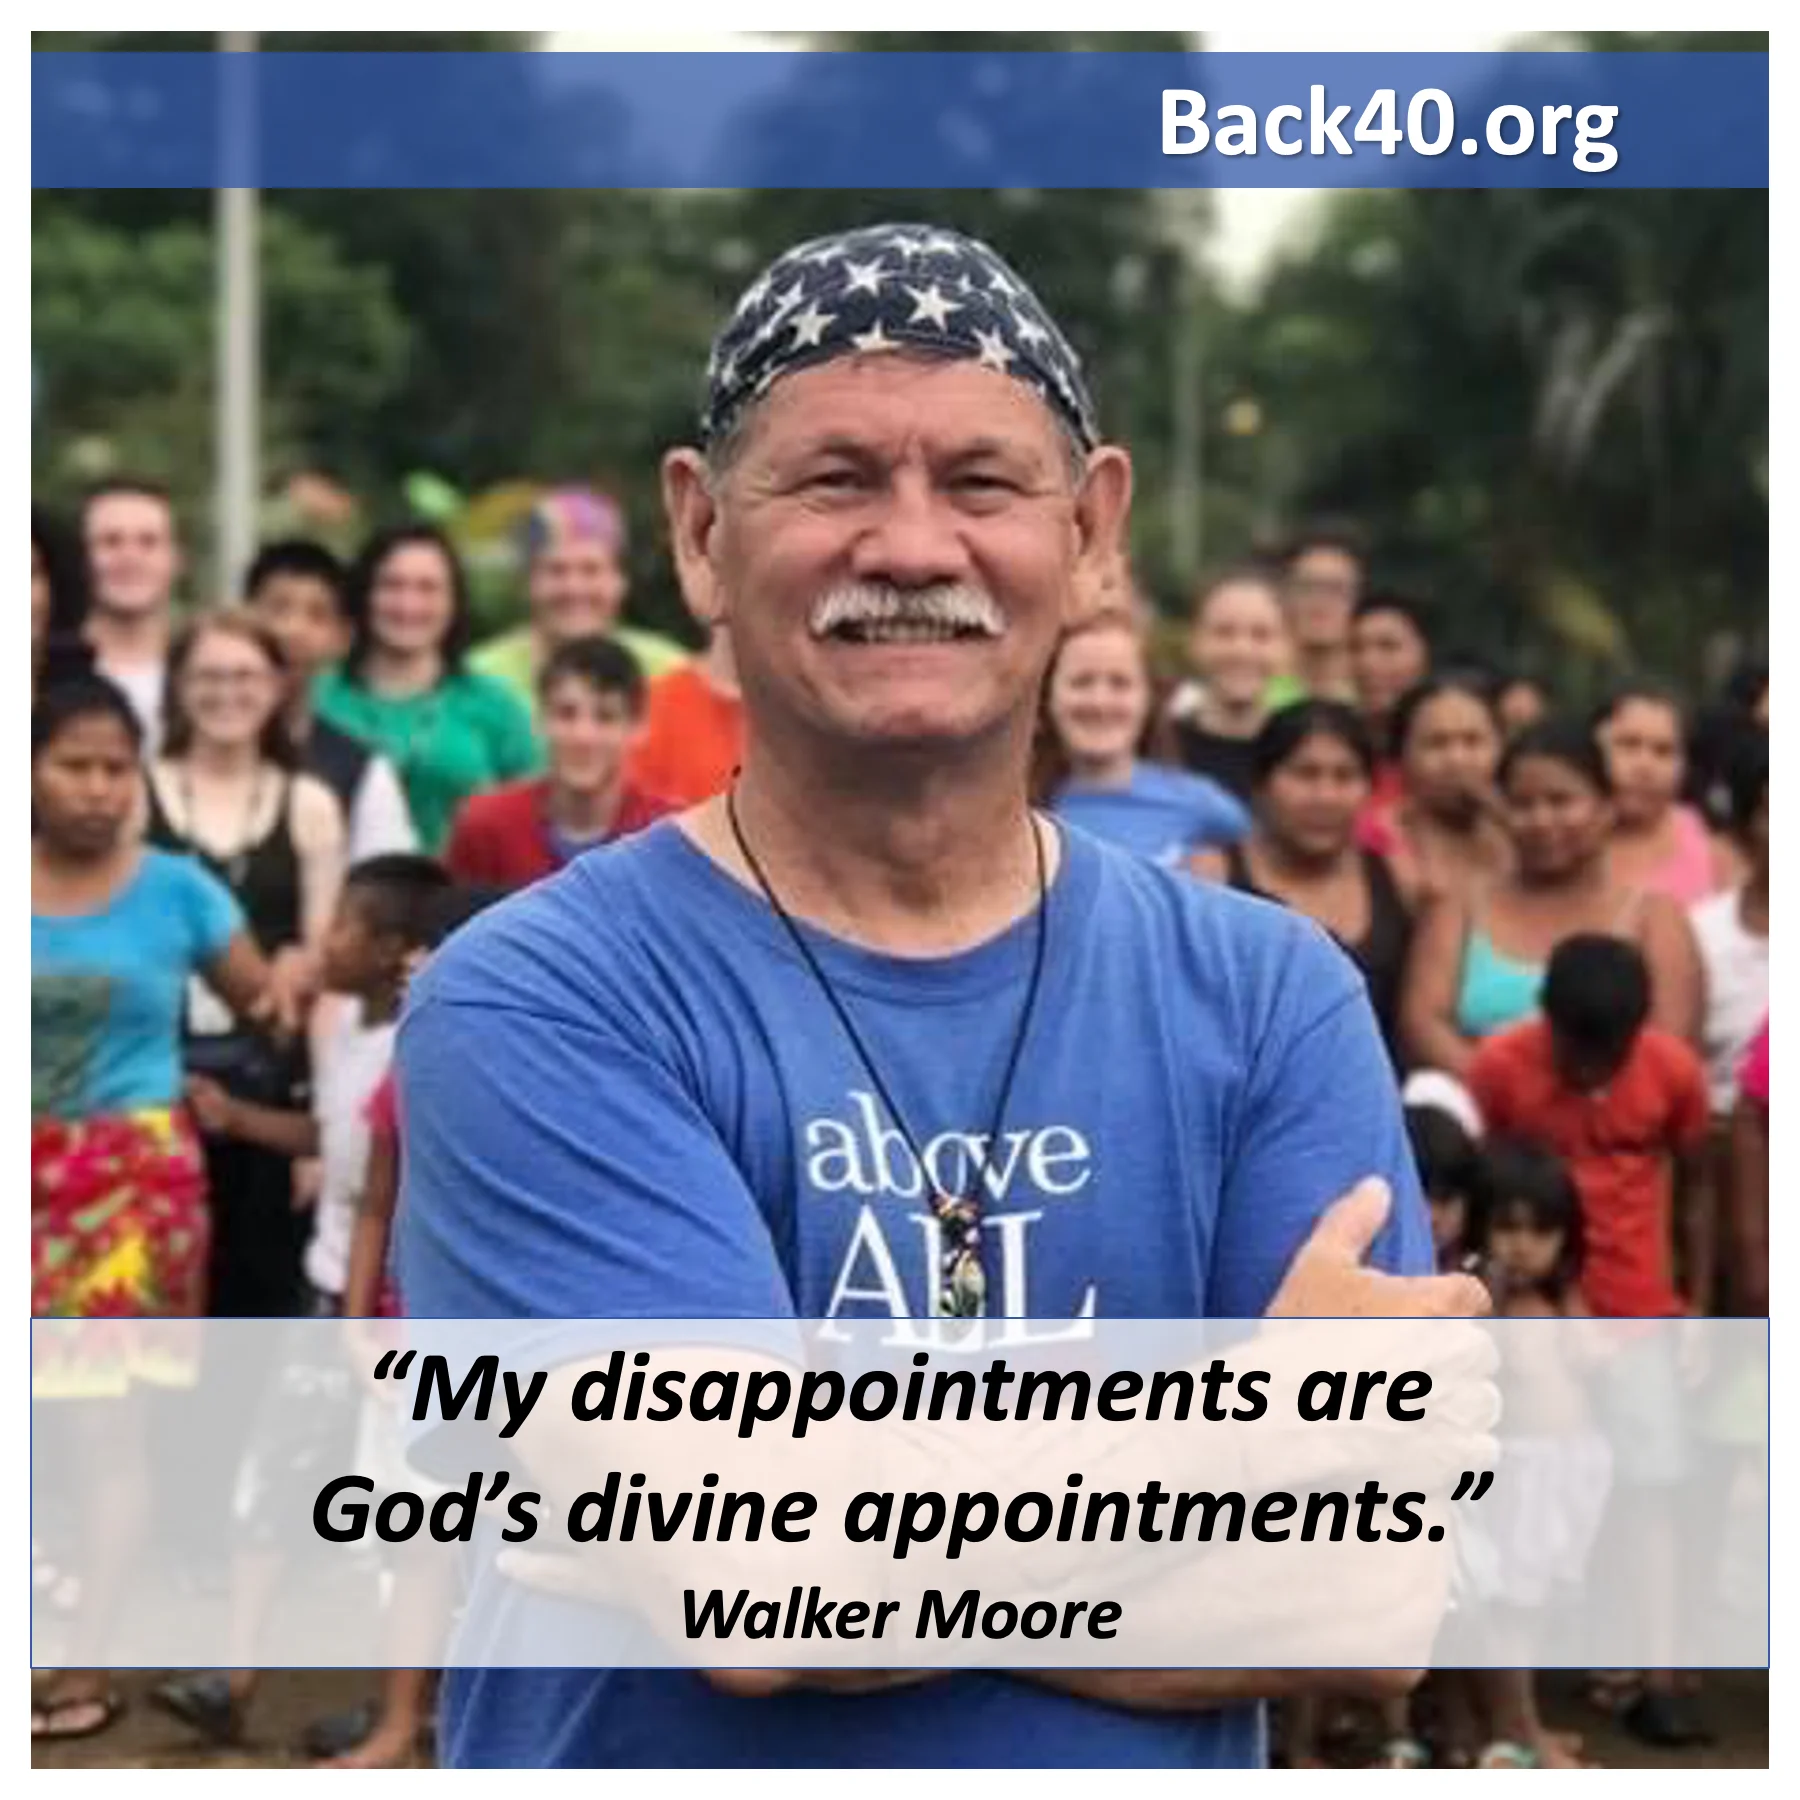 My disappointments are God's divine appointments.